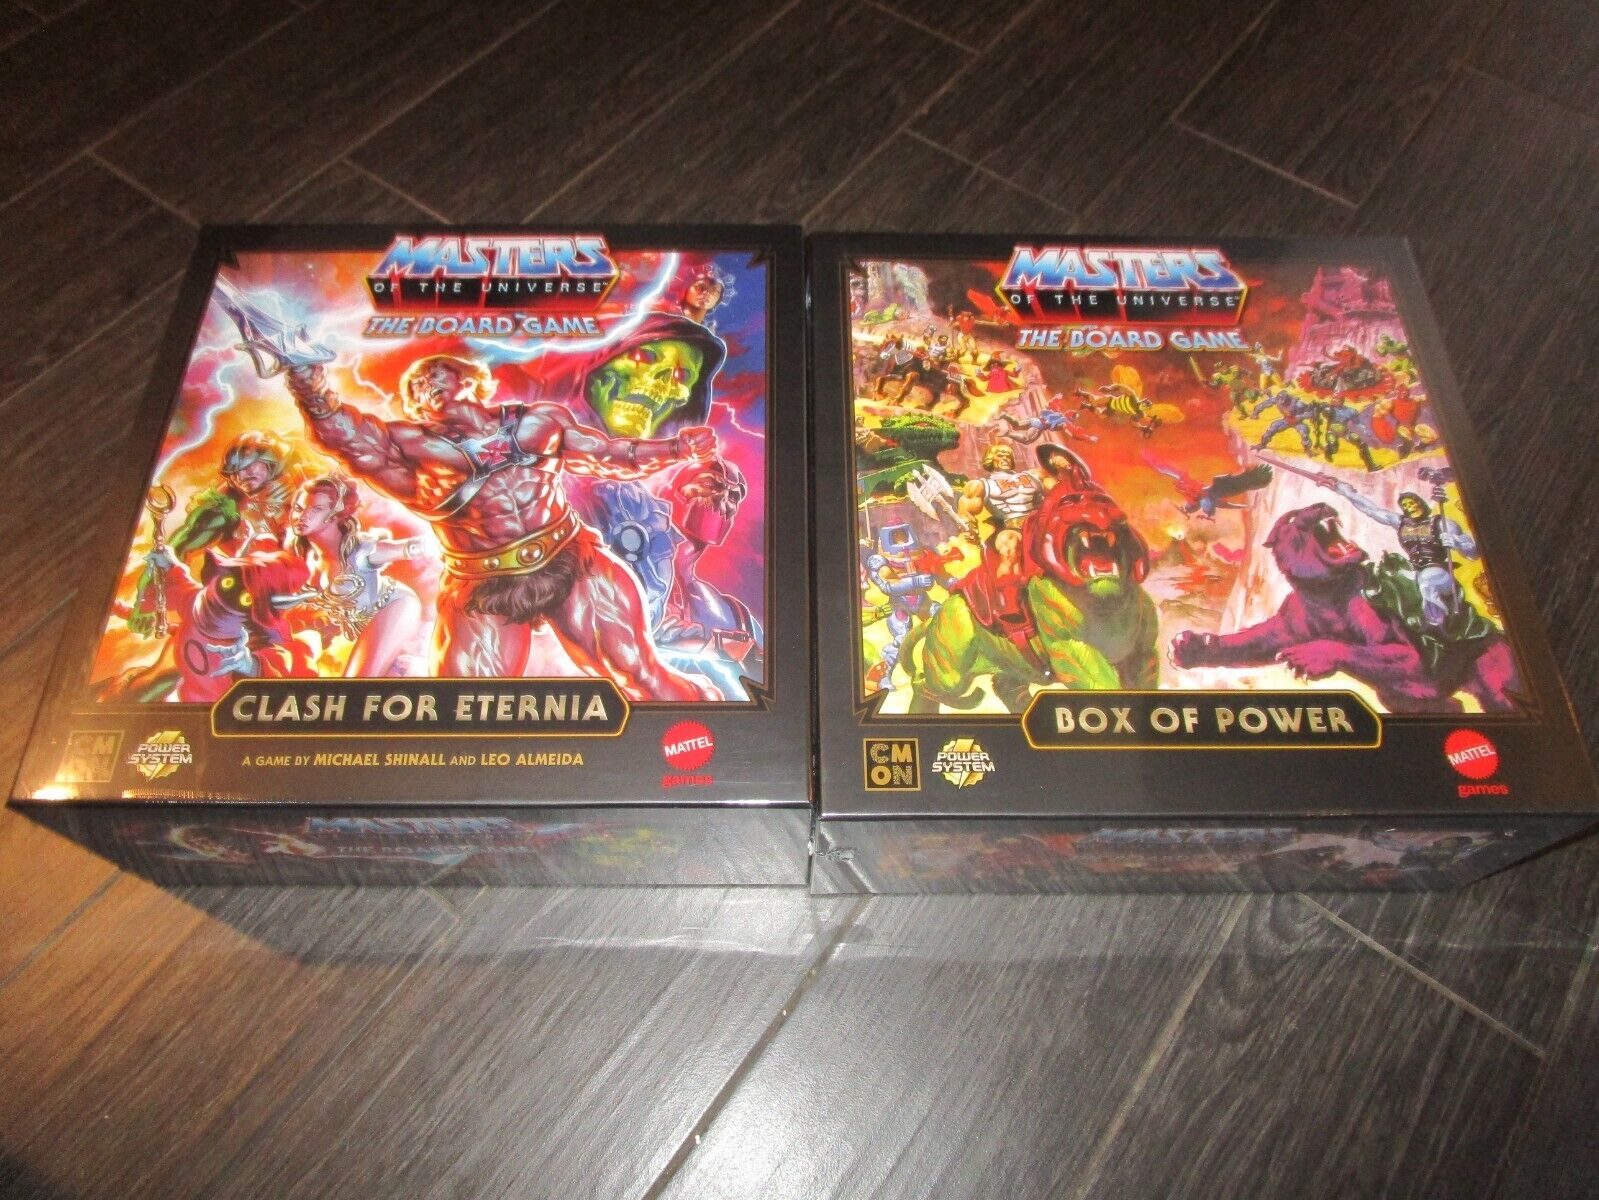 HE-MAN Masters of the Universe Clash for Eternia Kickstarter Exclusive Pledge